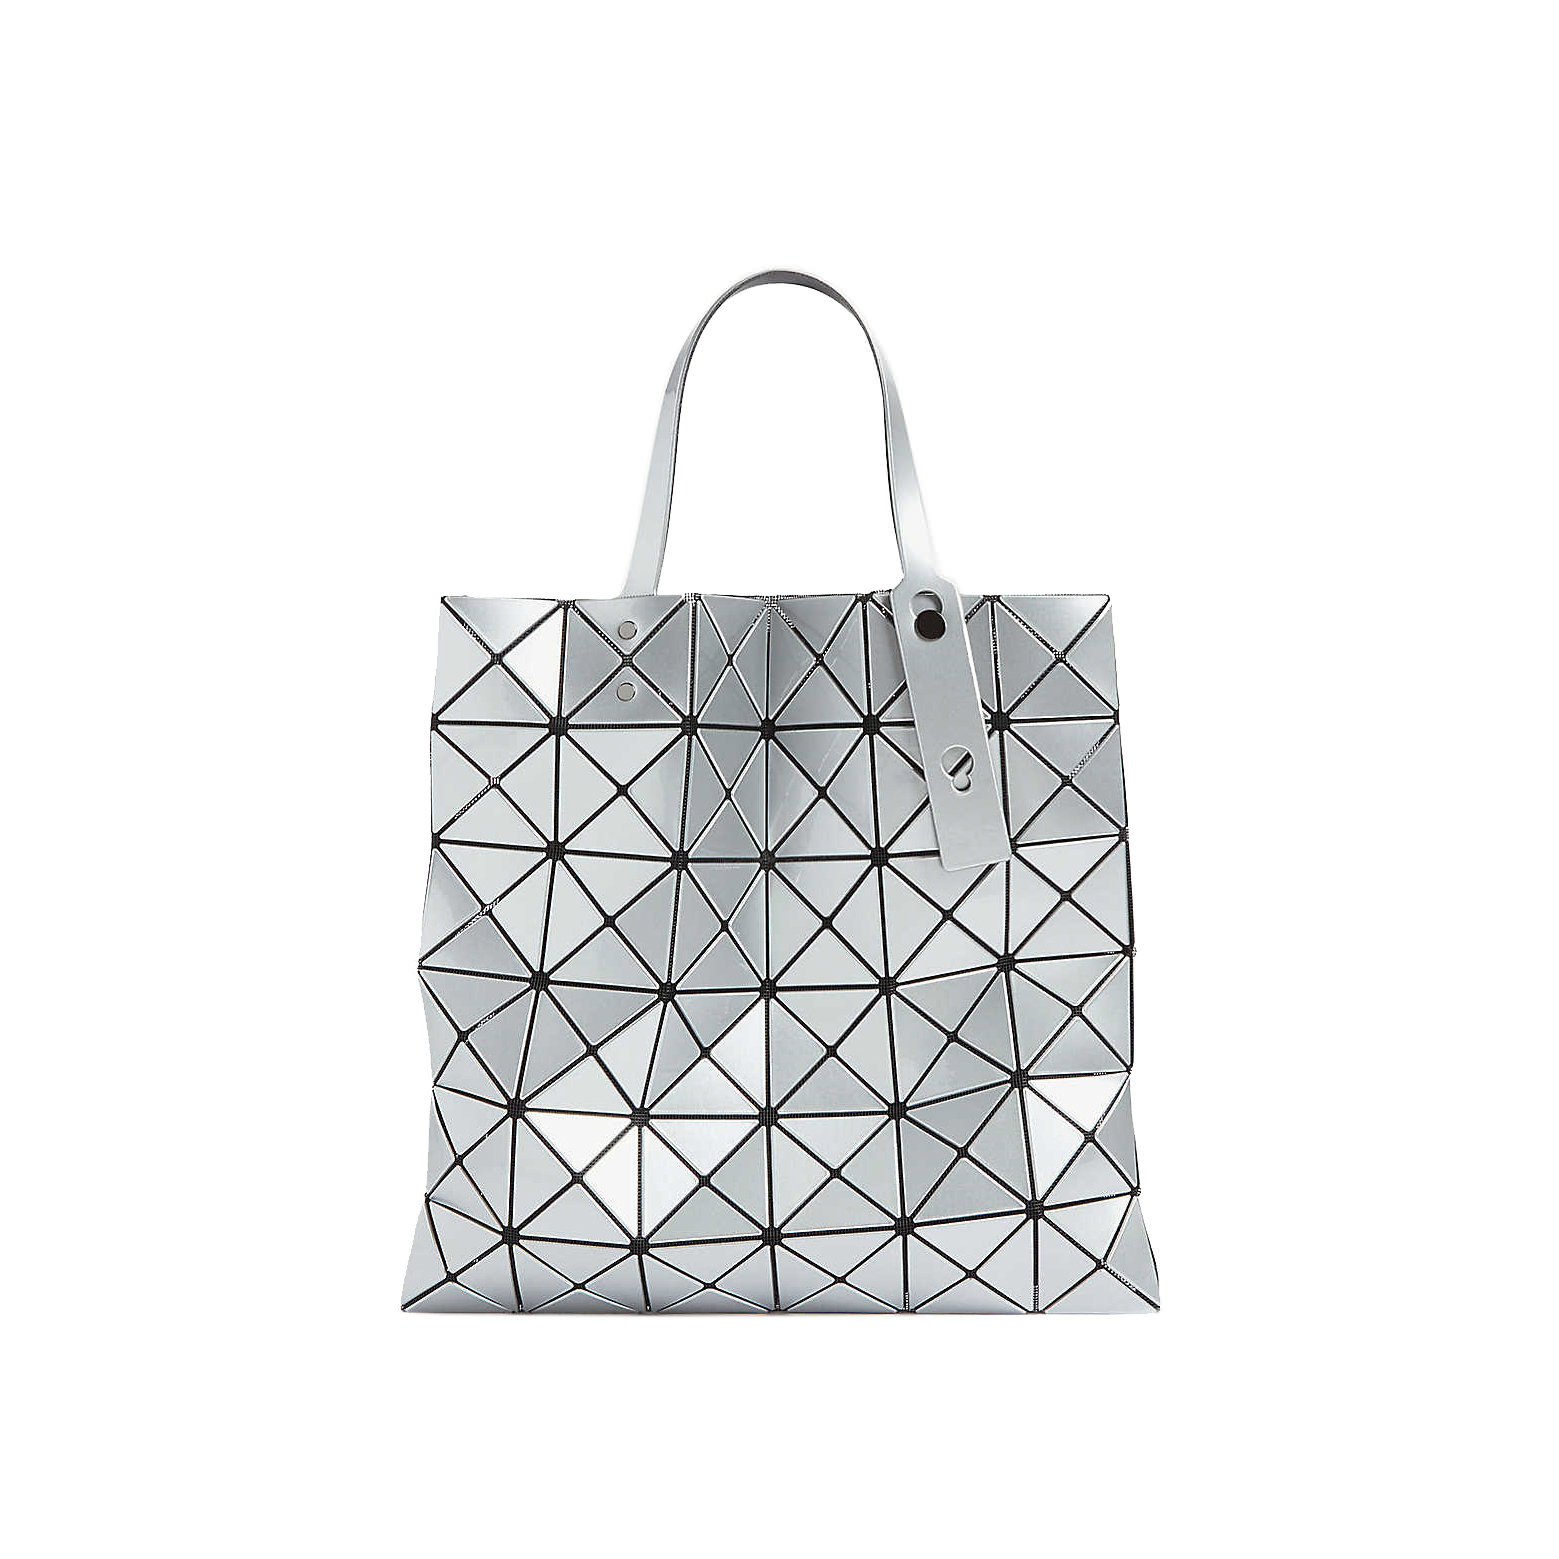 Lucent tote bagLucent tote bag - OFour